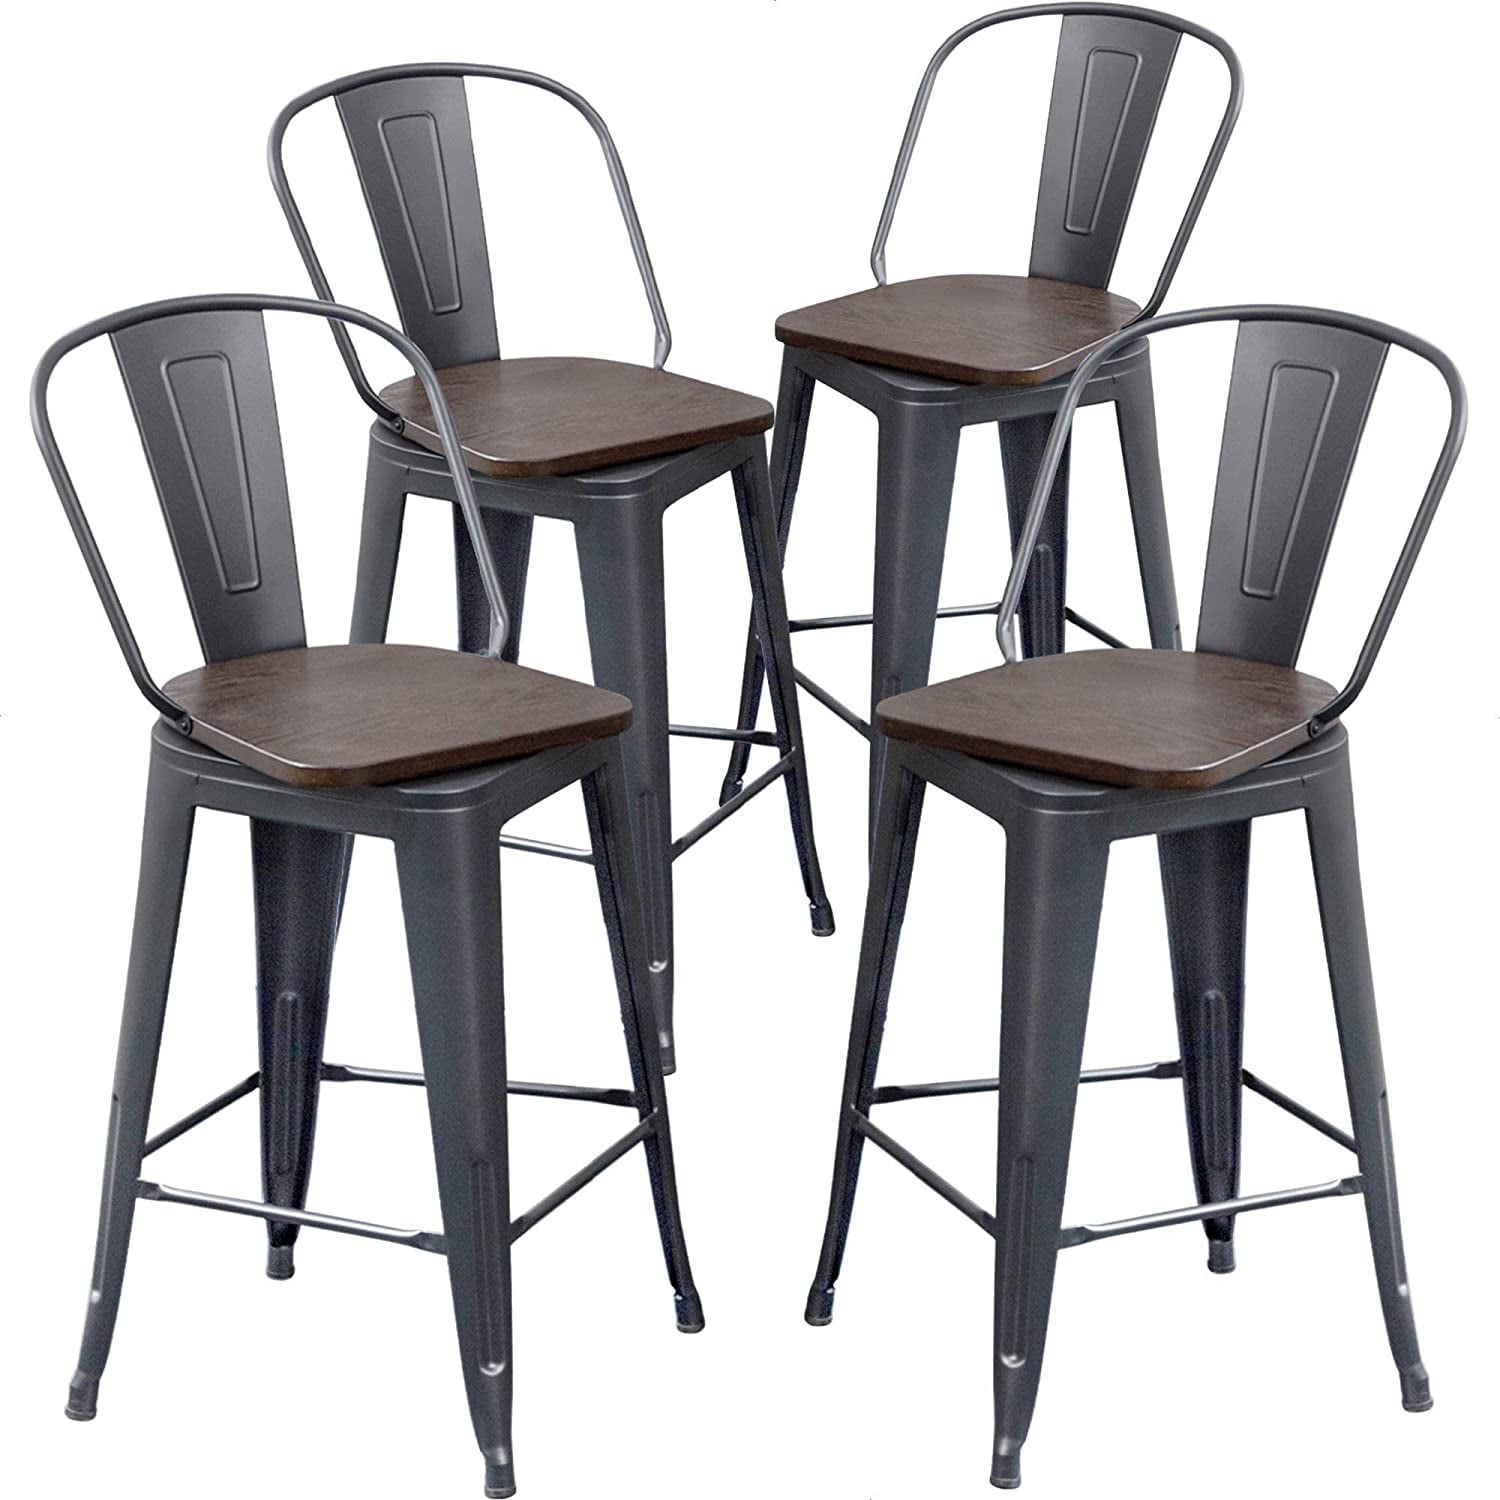 Copper Set of 4 Metal Wood Counter Stool Kitchen Dining Bar Chairs Rustic New 